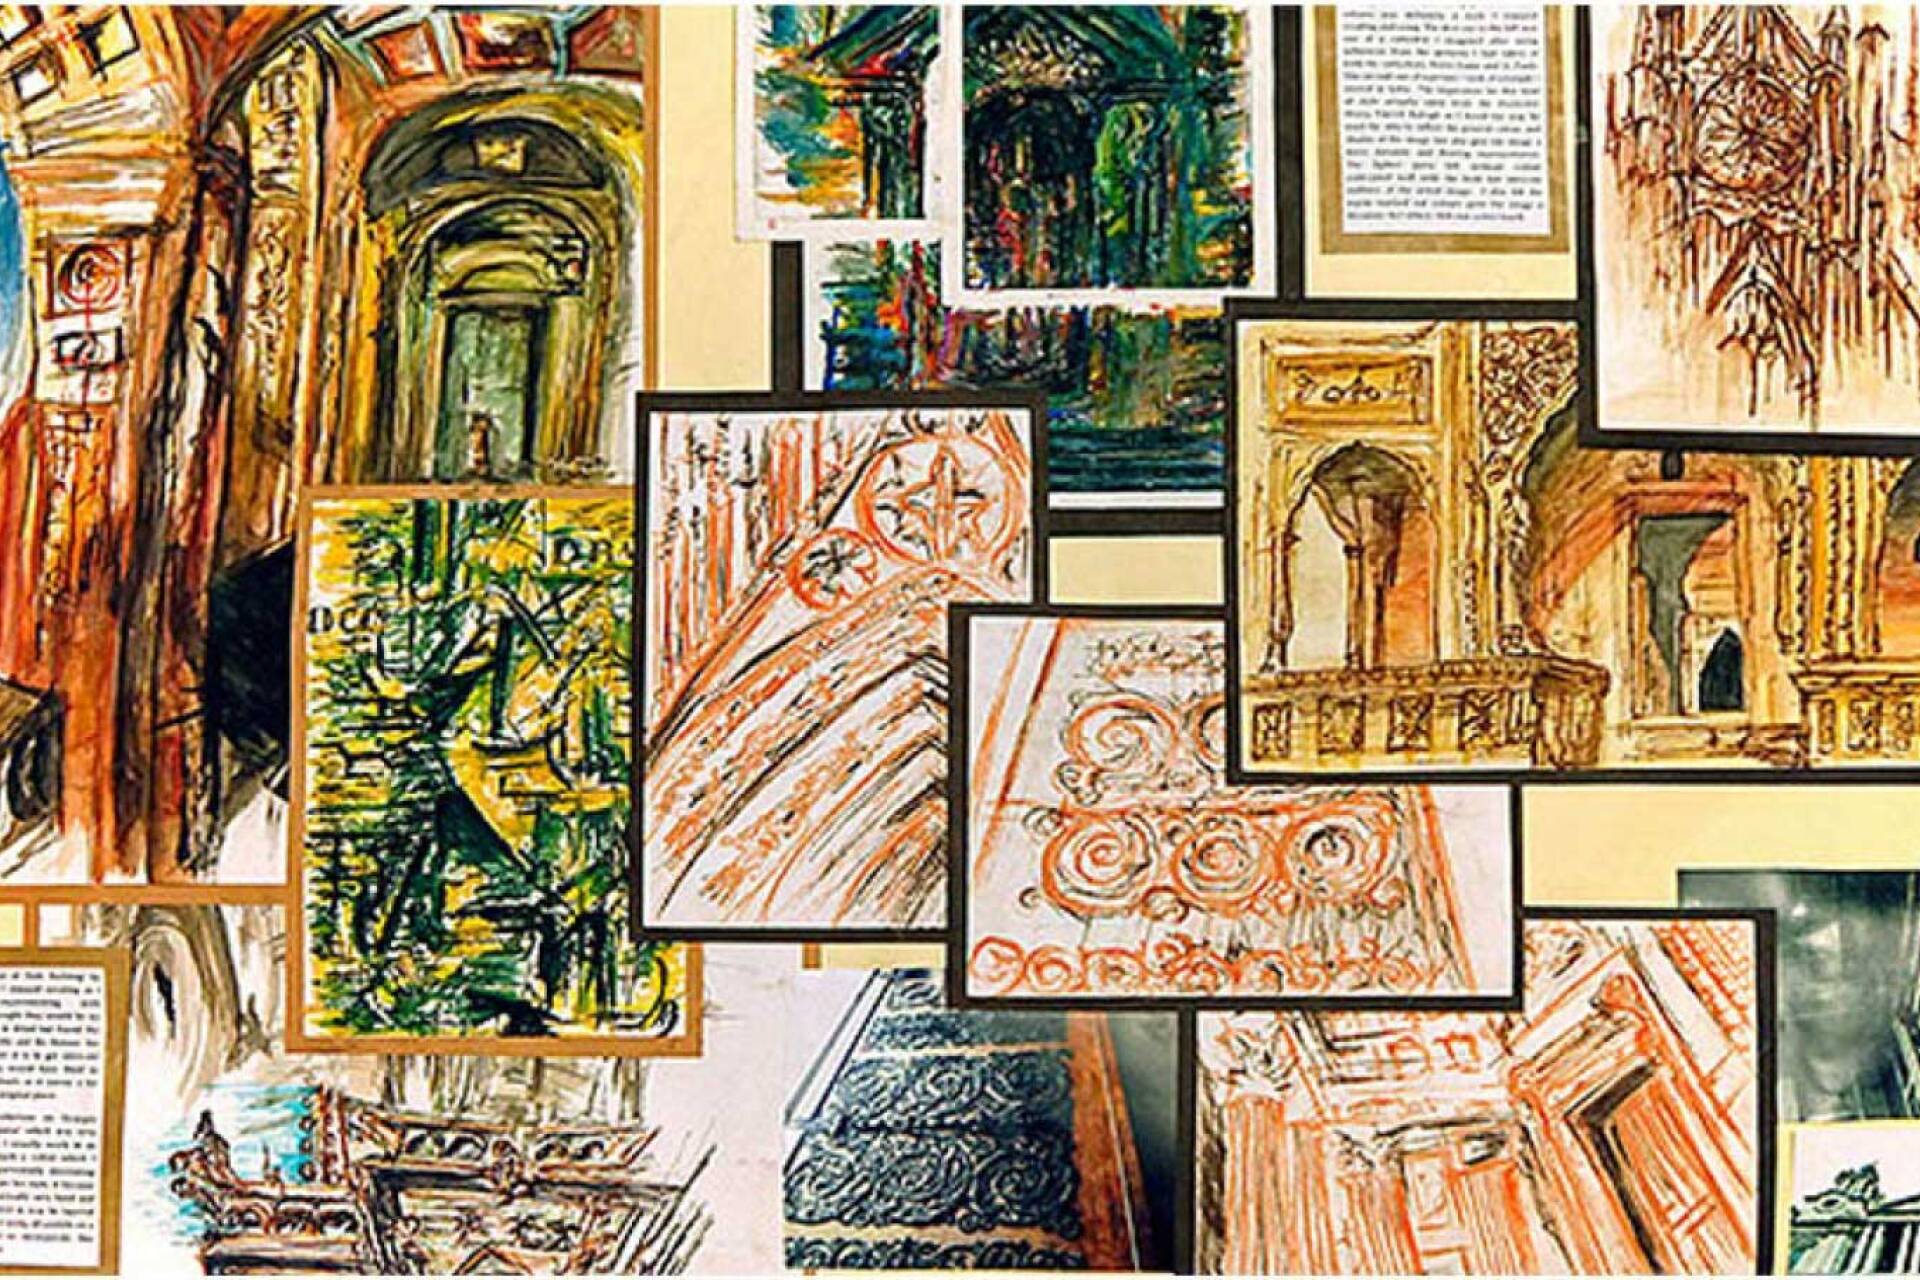 Collage showing sketched of building details using pastels.